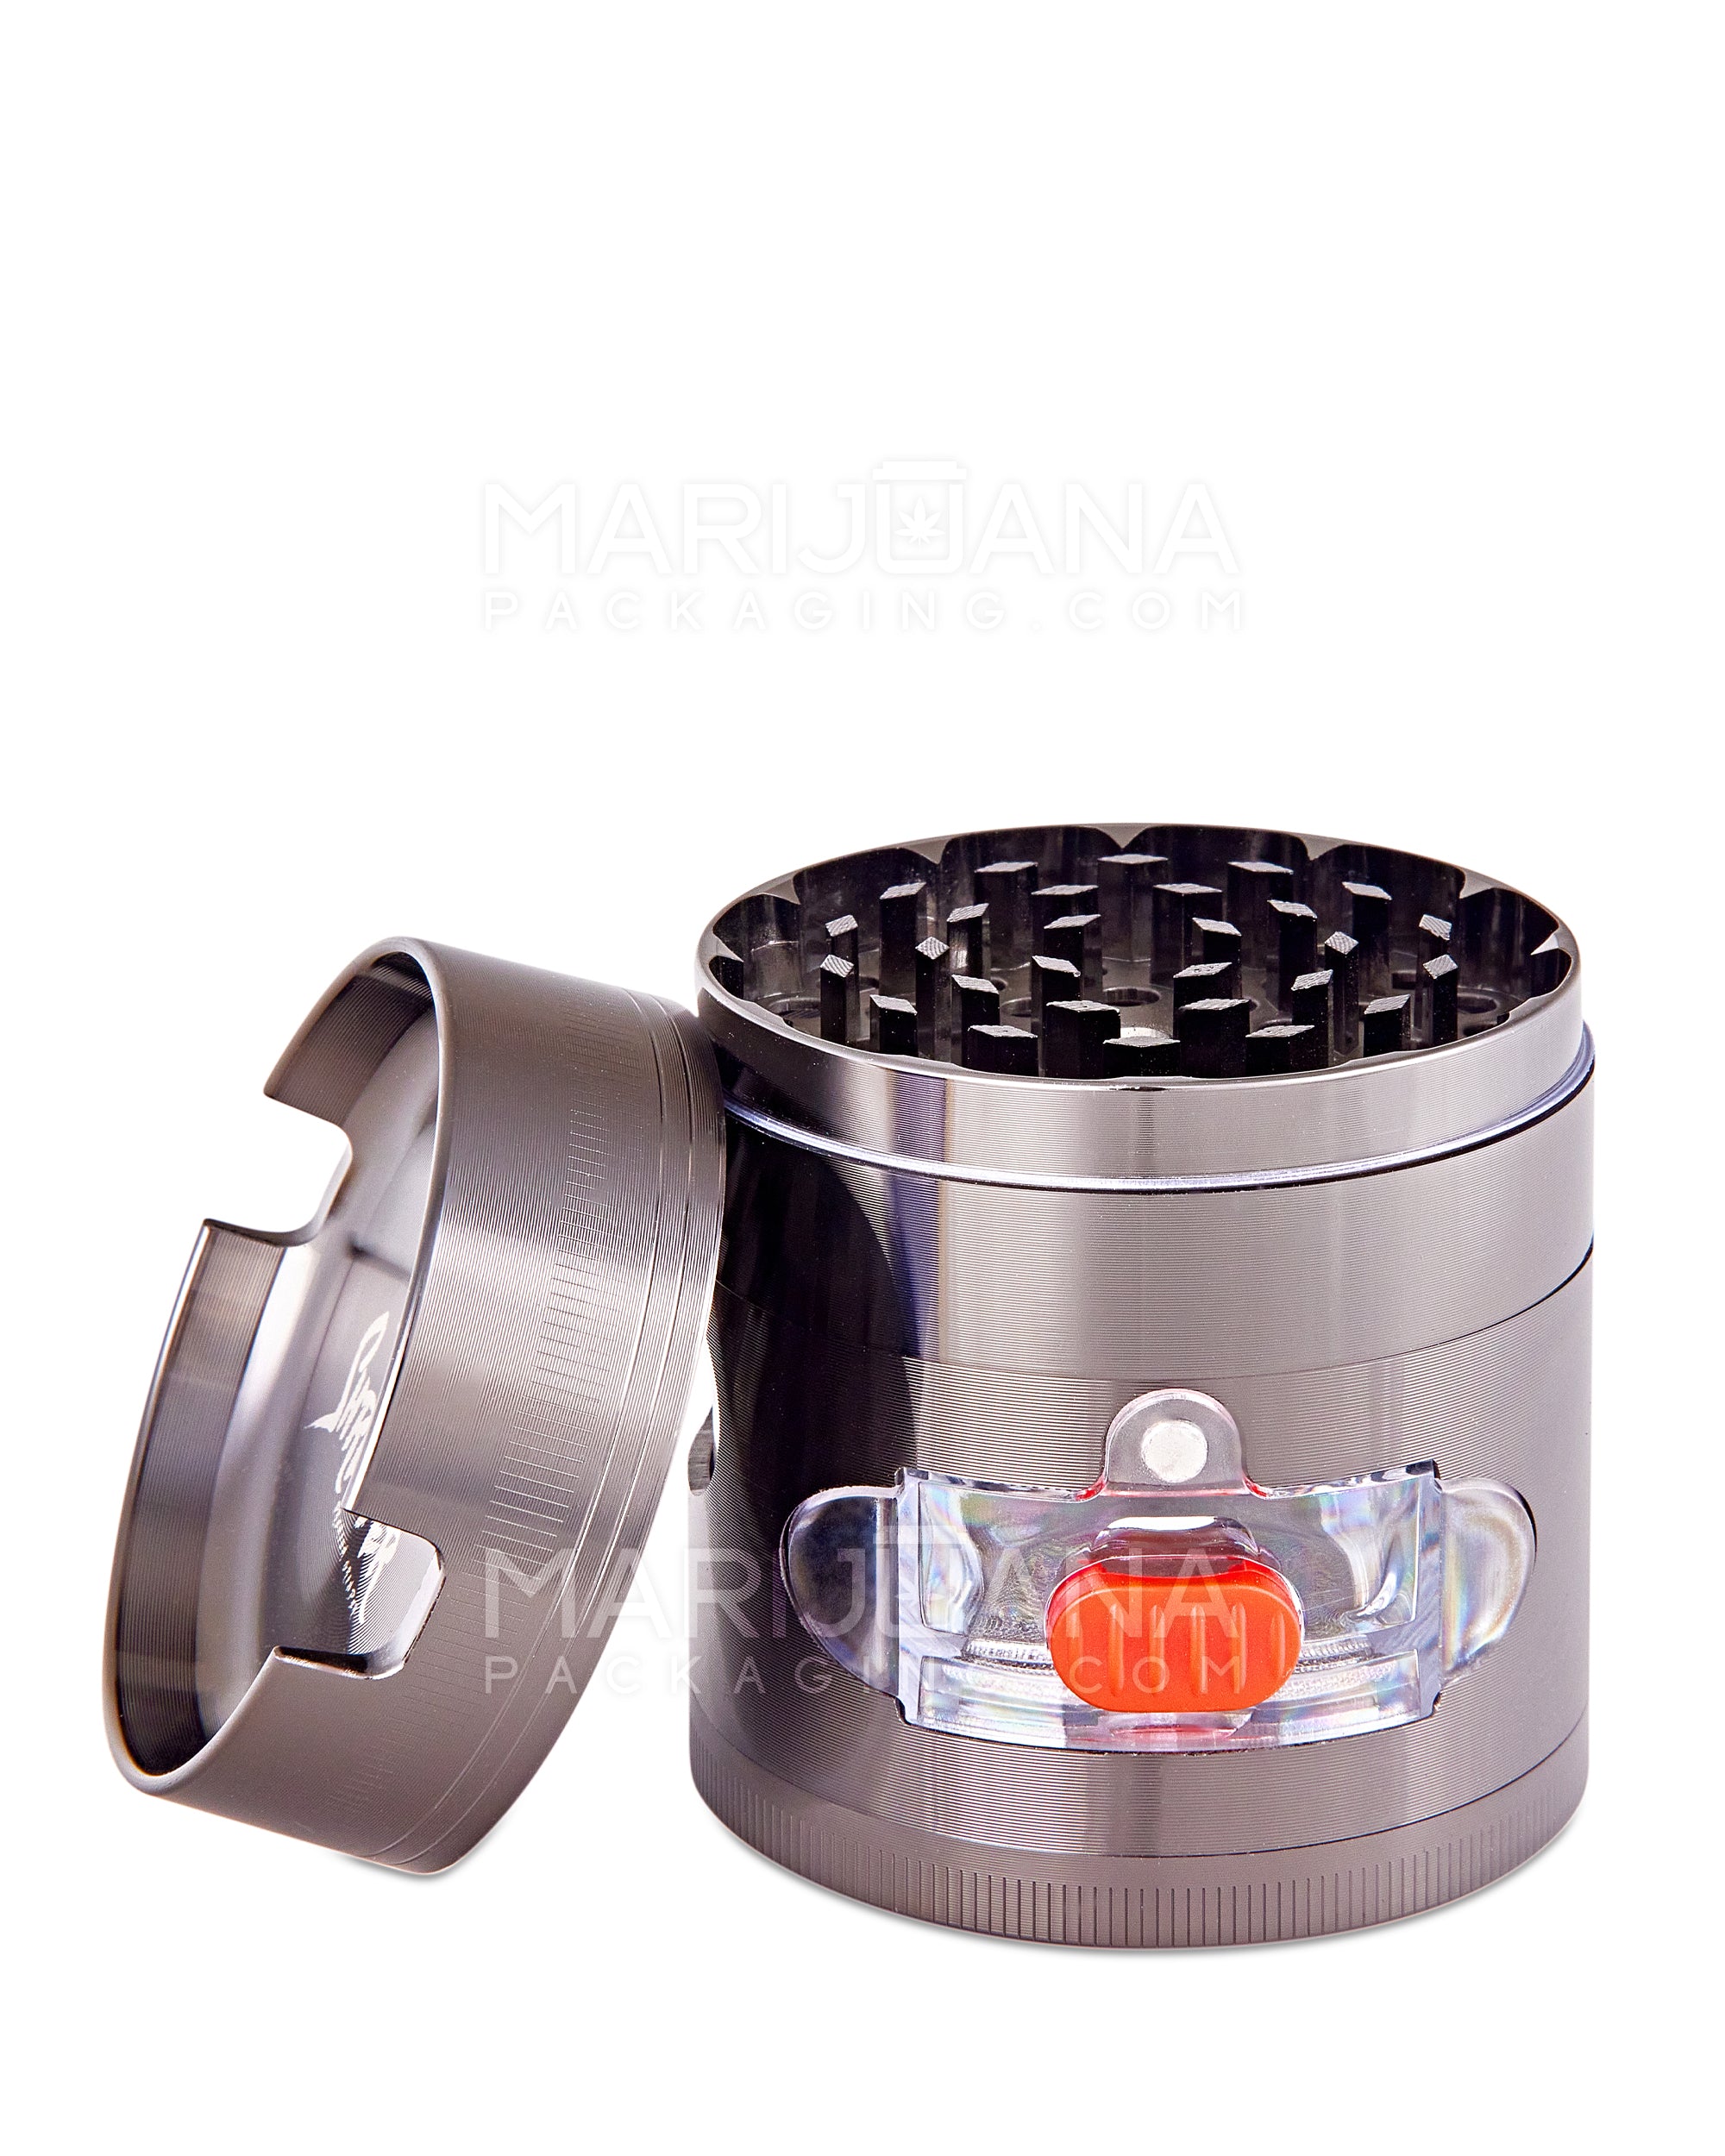 SHREDDER | Magnetic Metal Grinder w/ Pull Out Tray & Catcher | 4 Piece - 63mm - Gunmetal - 1